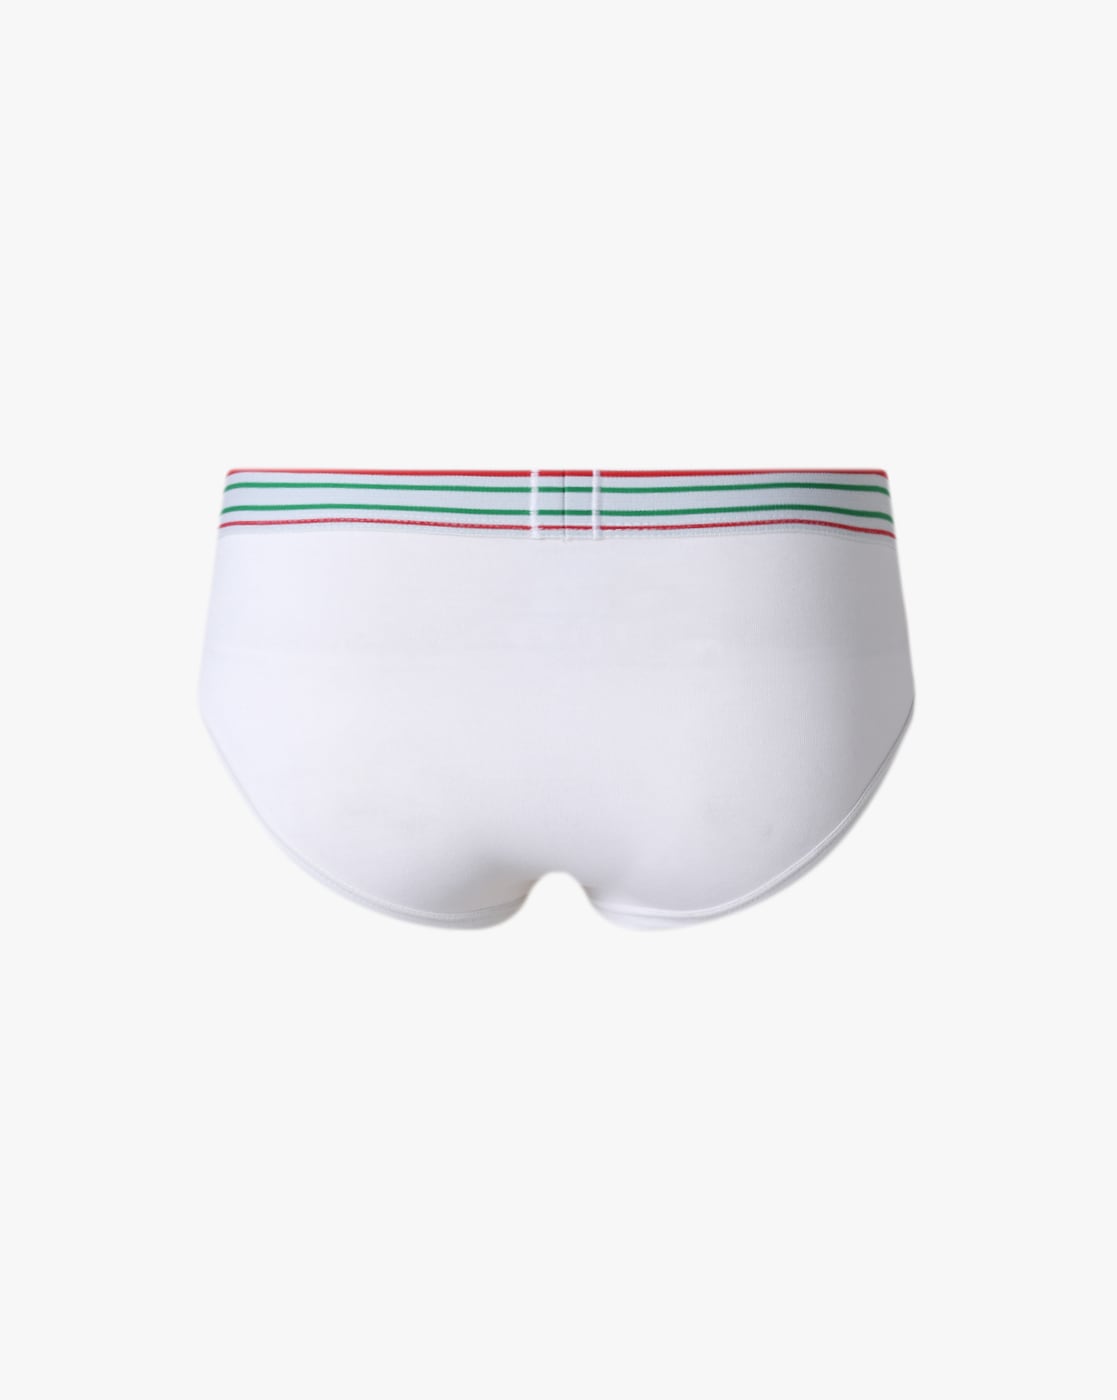 Buy White Briefs for Men by Under Colors of Benetton Online